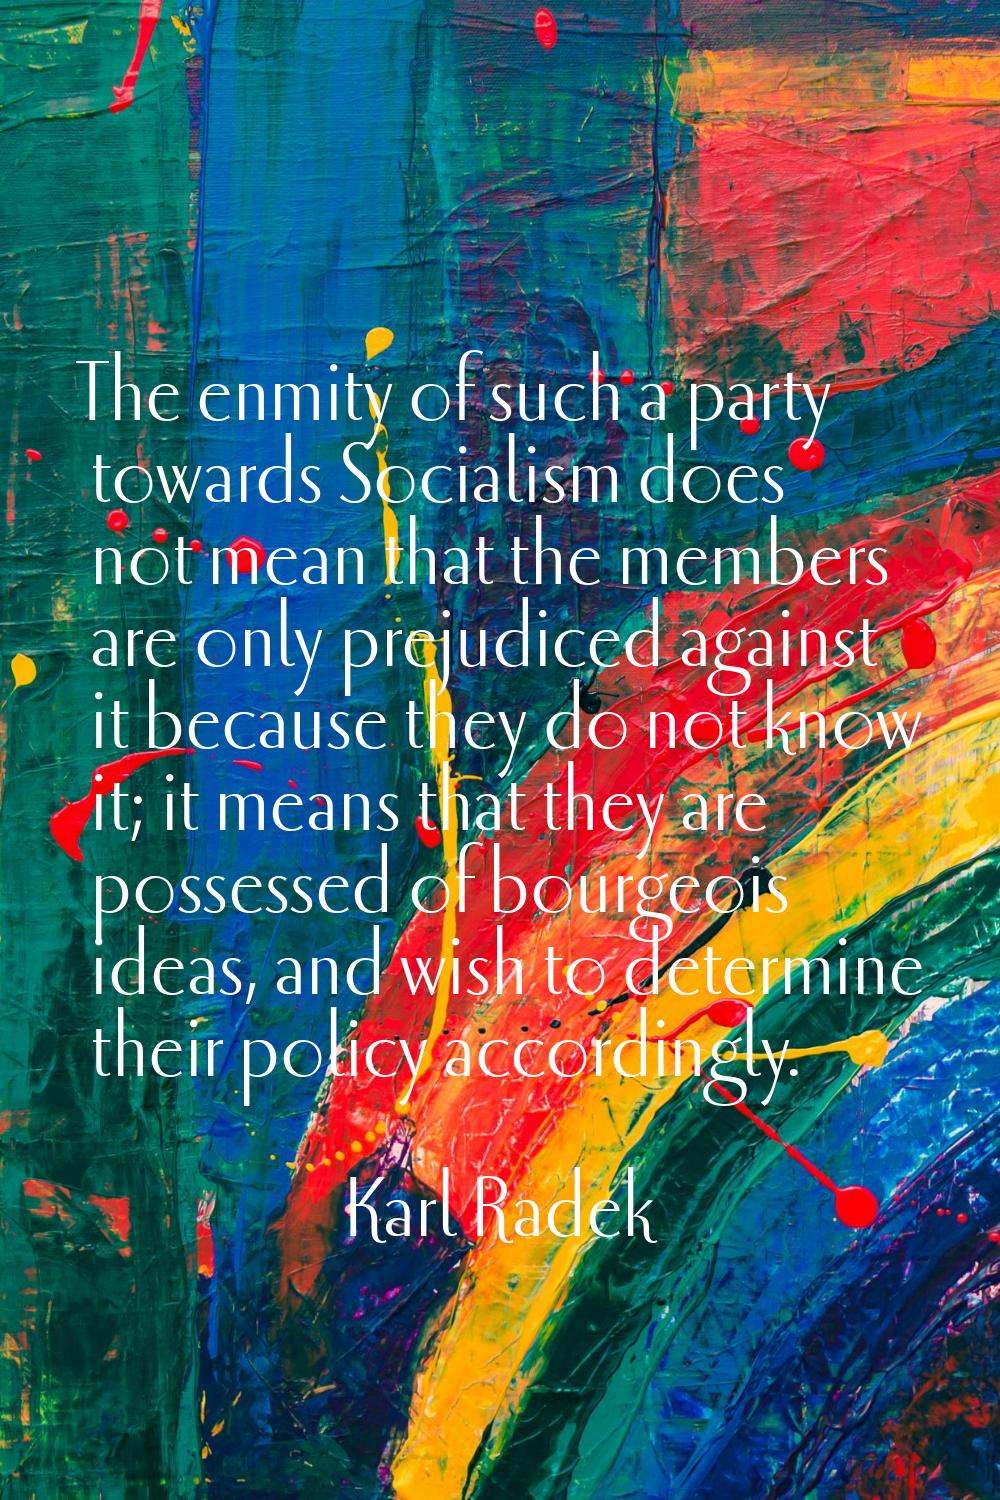 The enmity of such a party towards Socialism does not mean that the members are only prejudiced aga